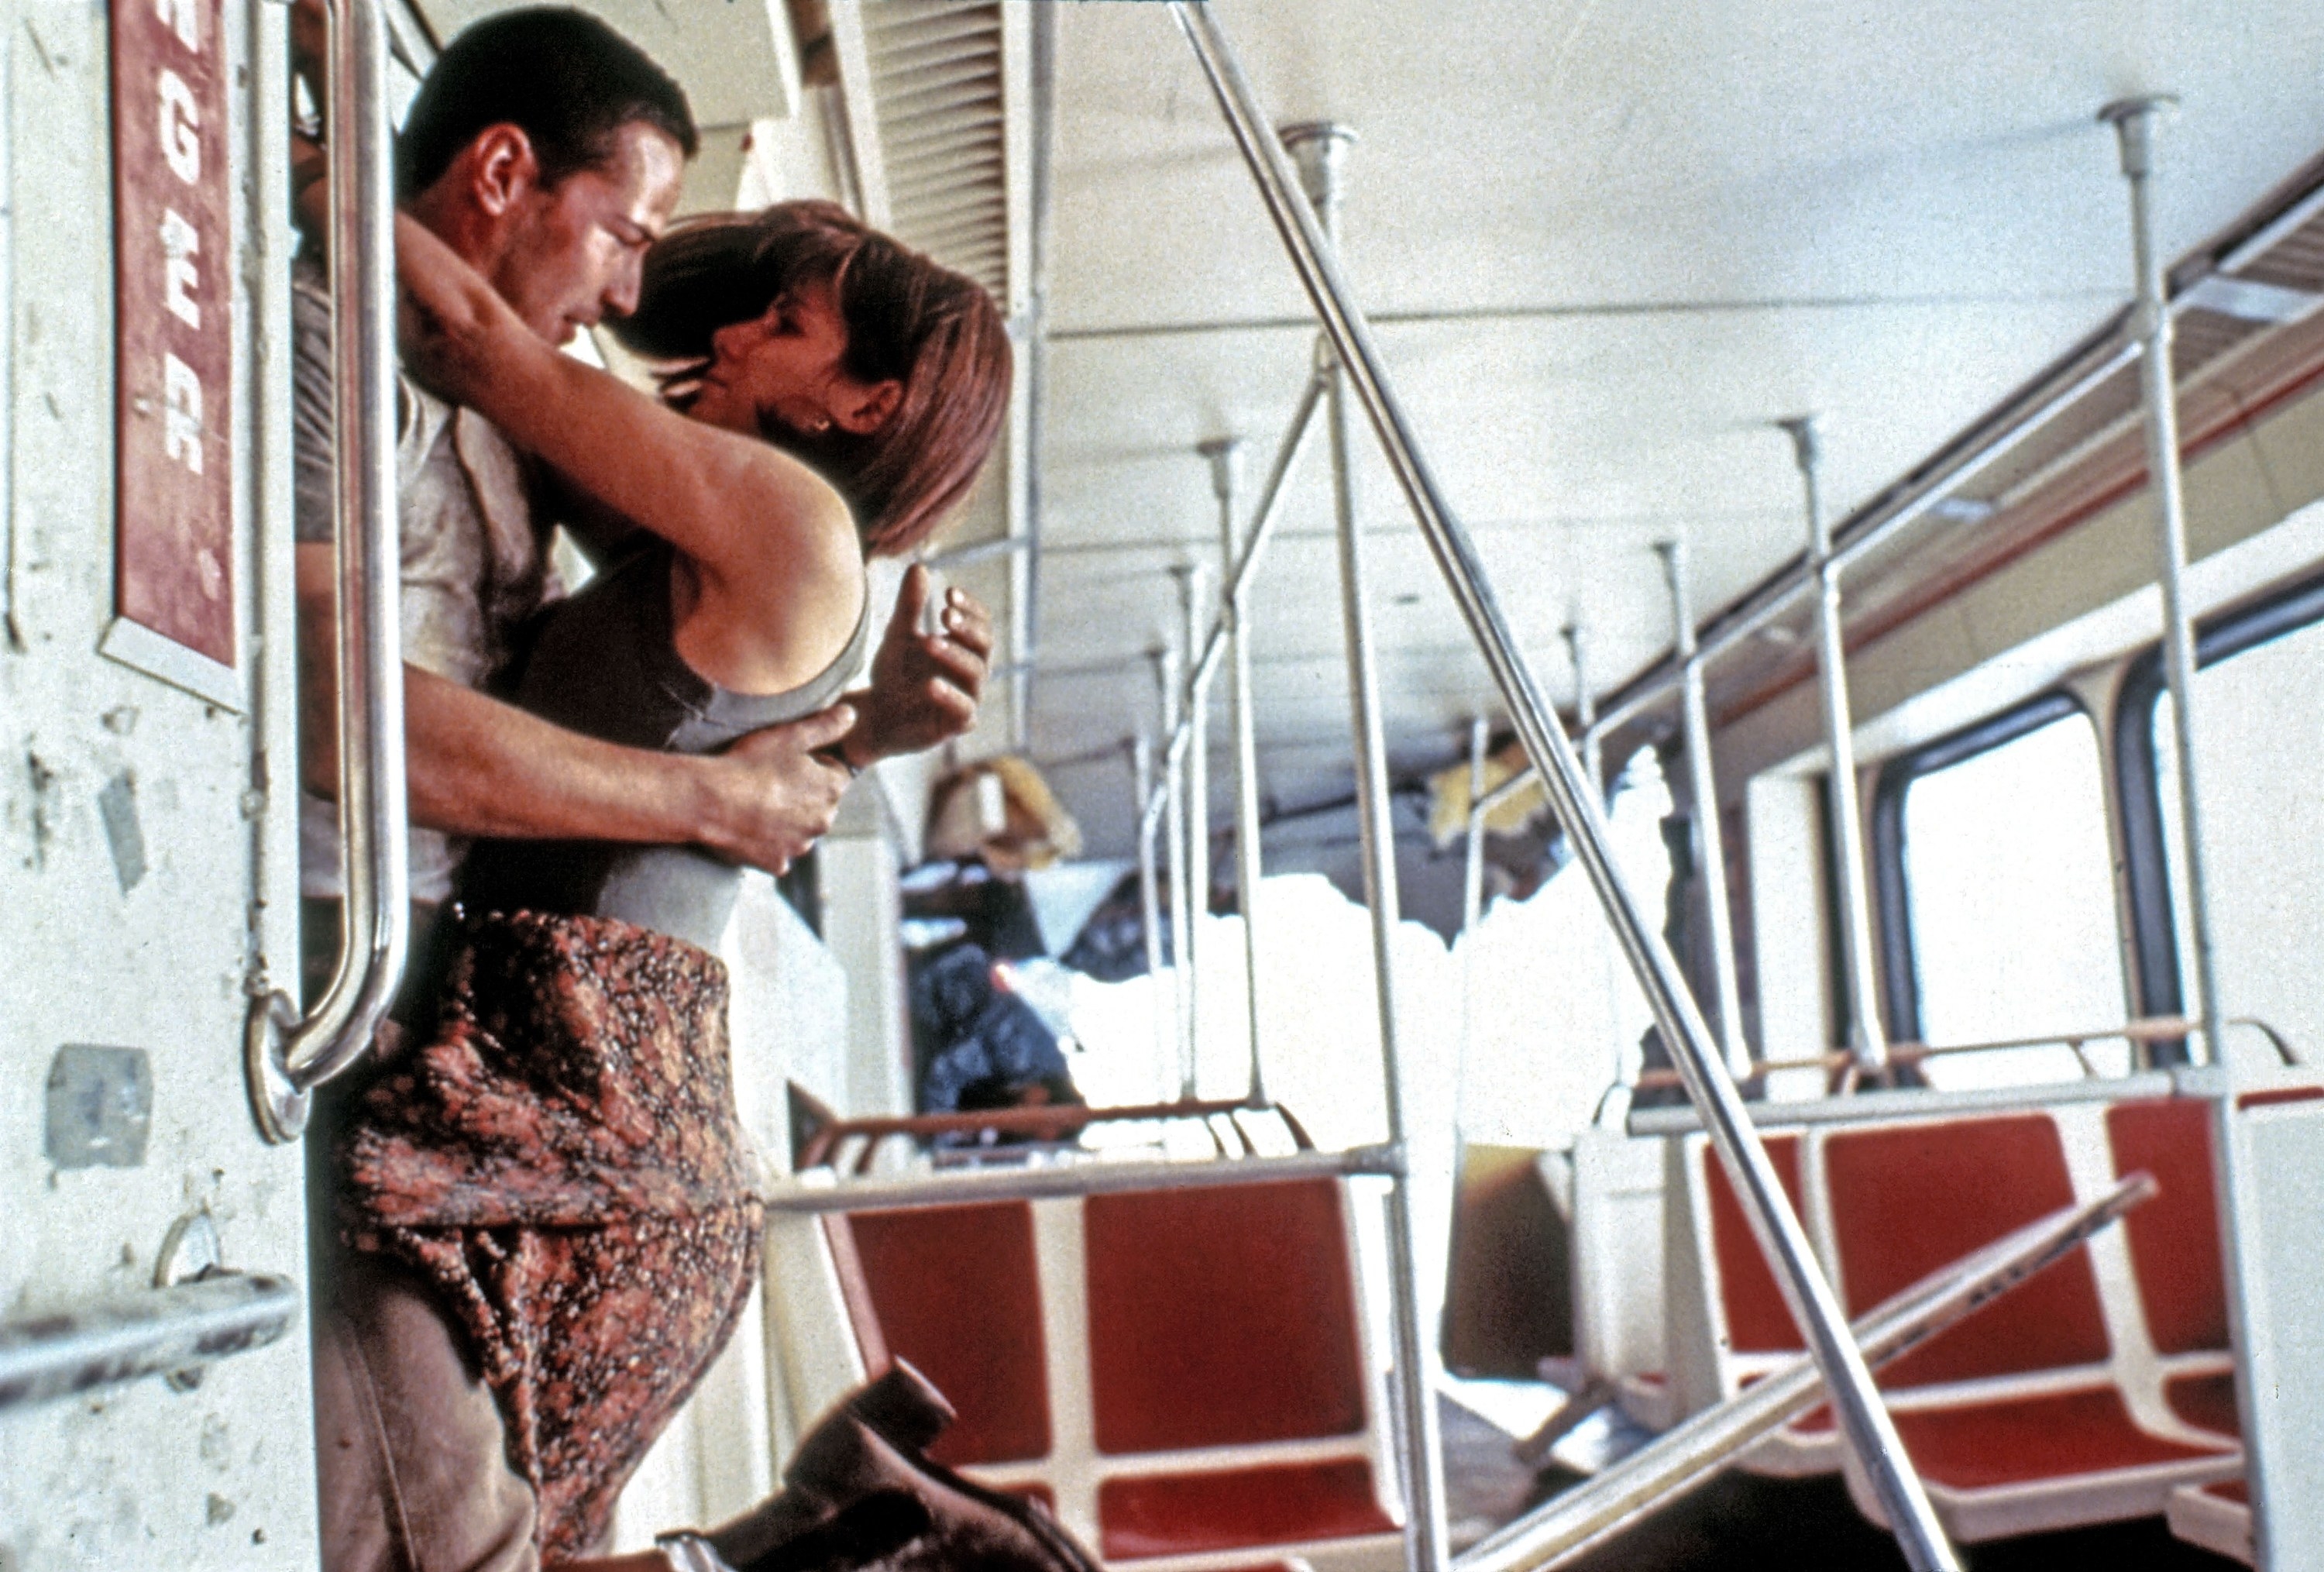 A woman jumps up into the arms of a man on a bus